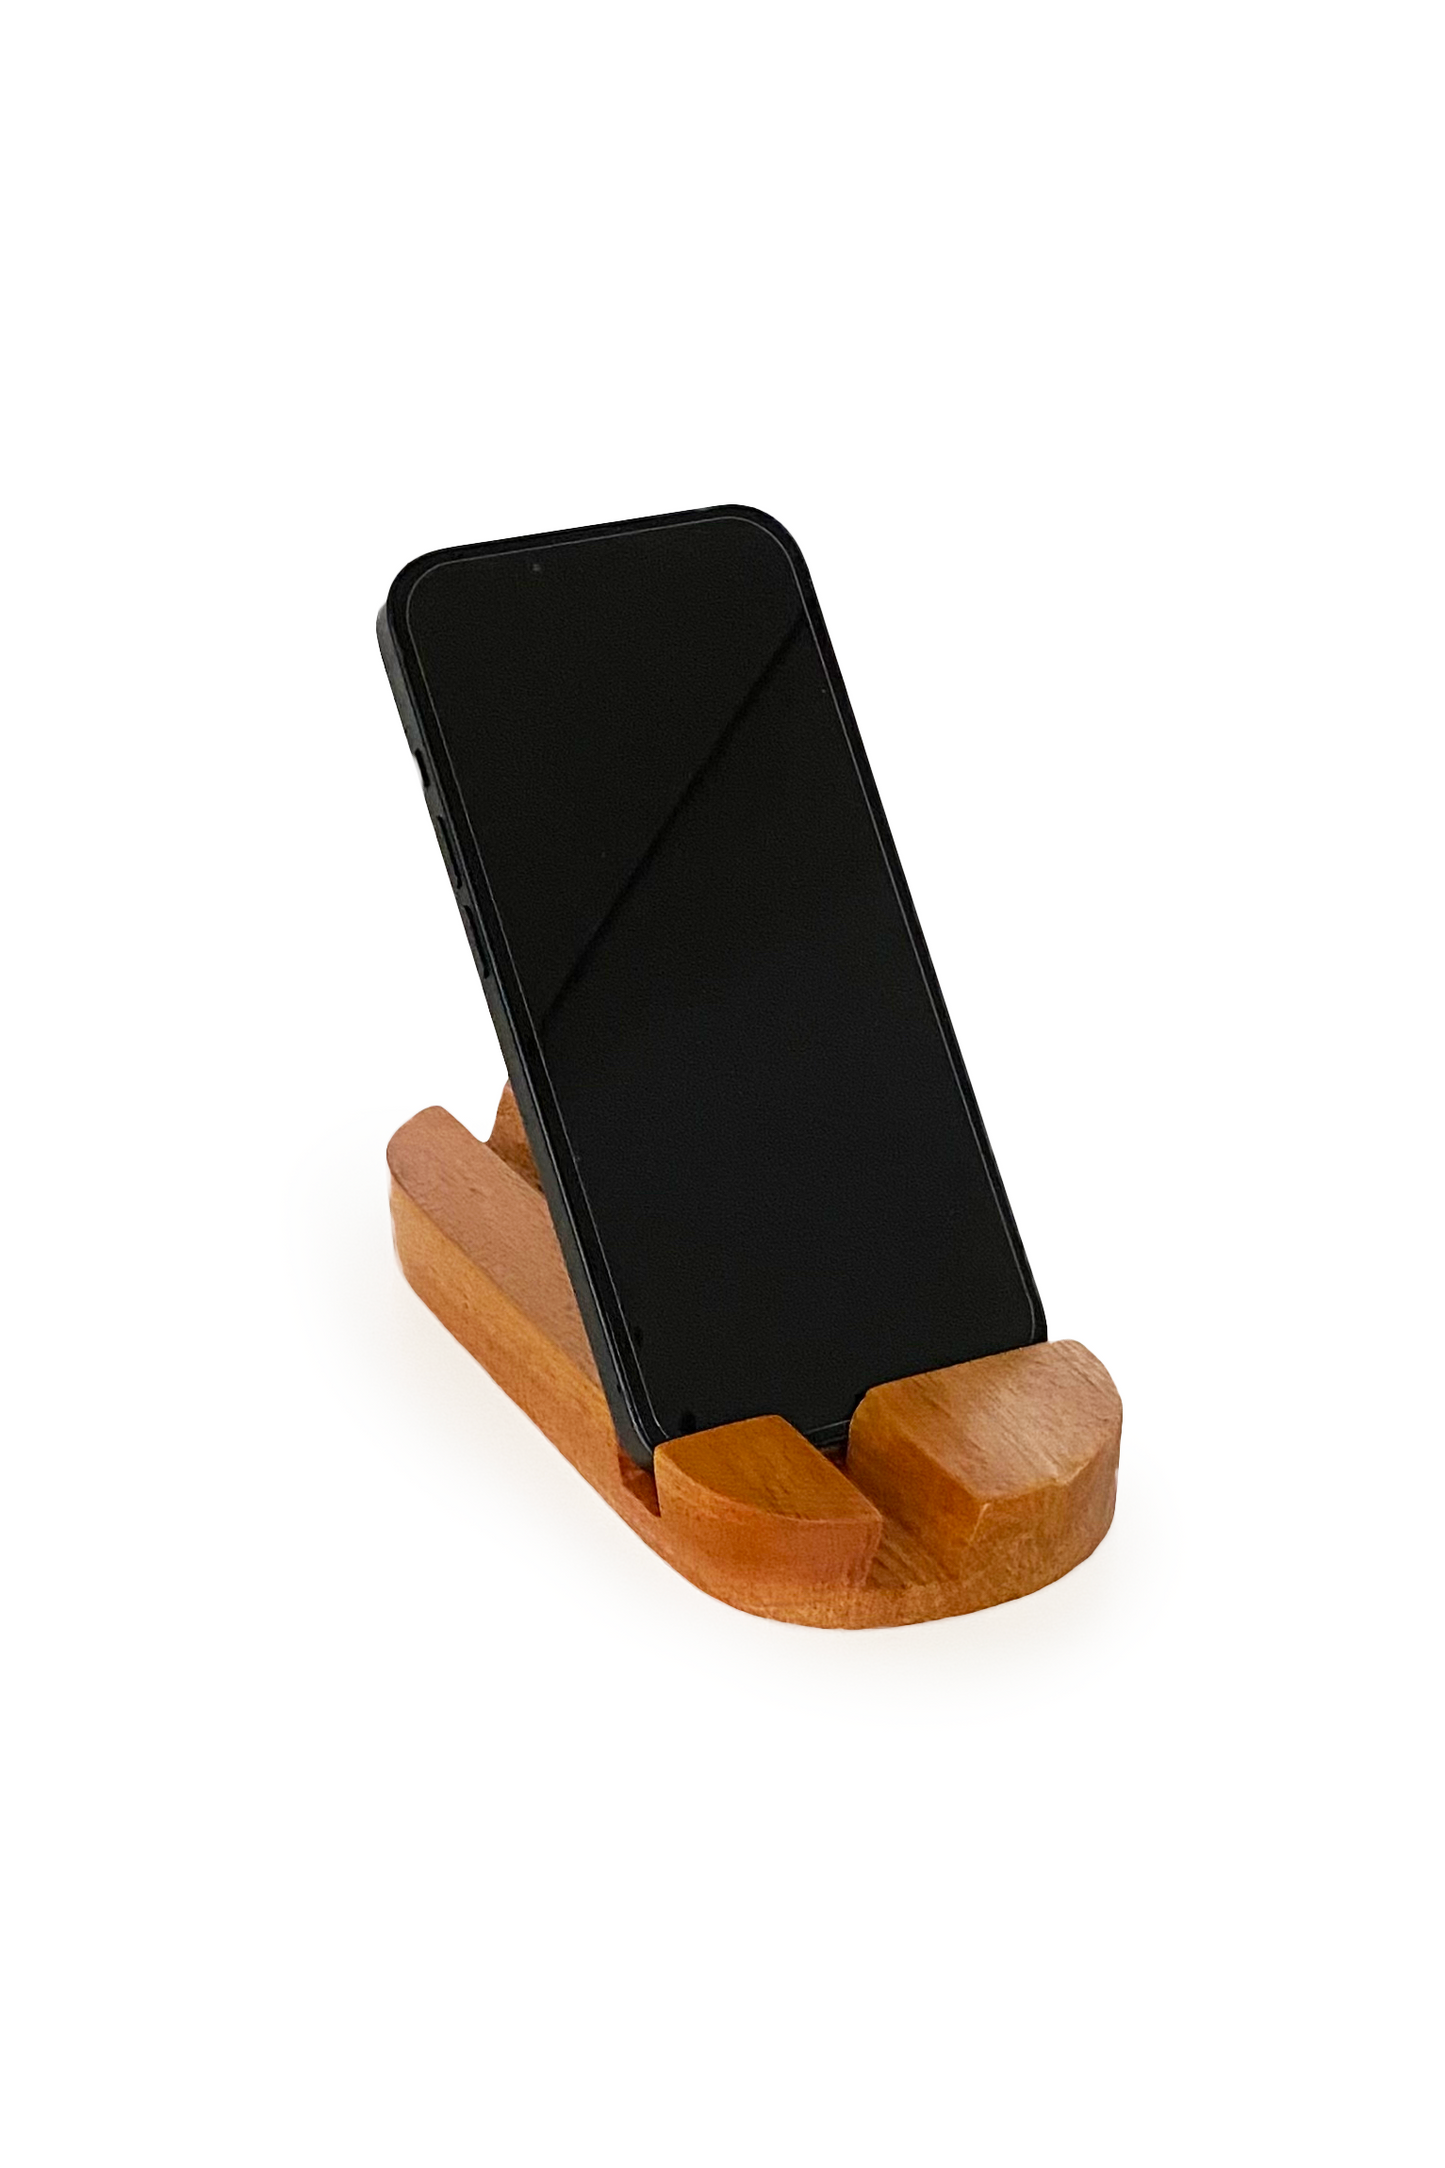 Handcarved Device Stand